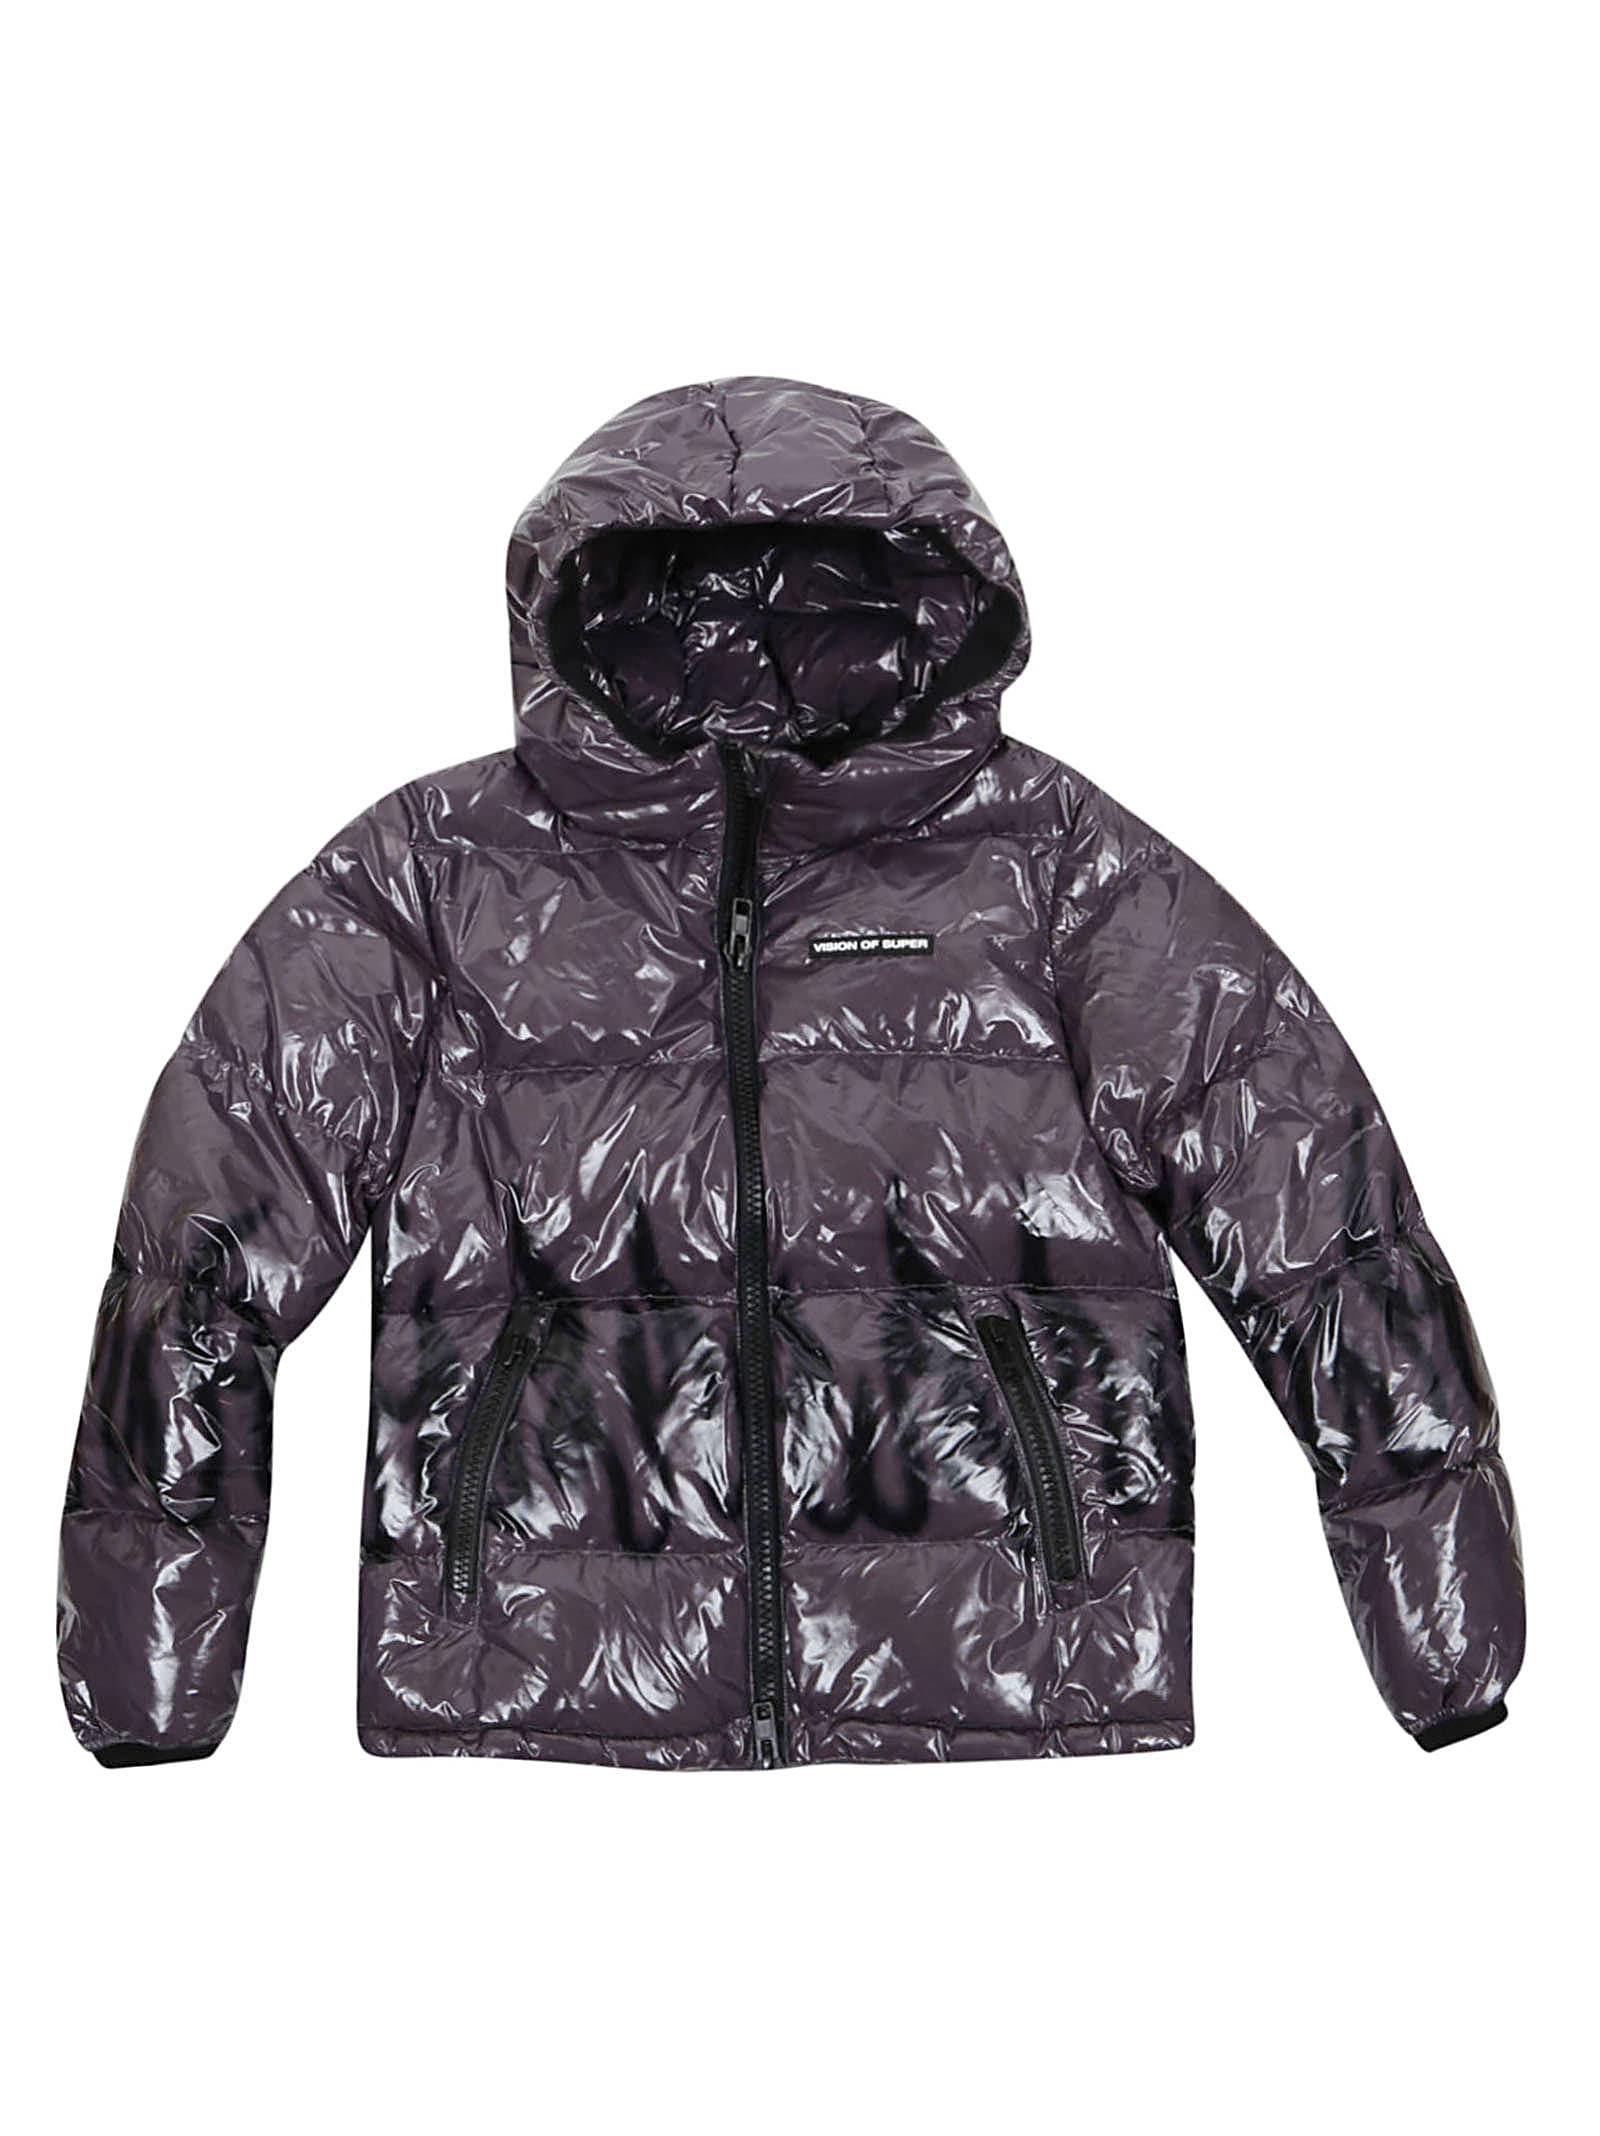 Vision of Super Nylon Black Grey Glossy Puffy Outwear With Black Flames